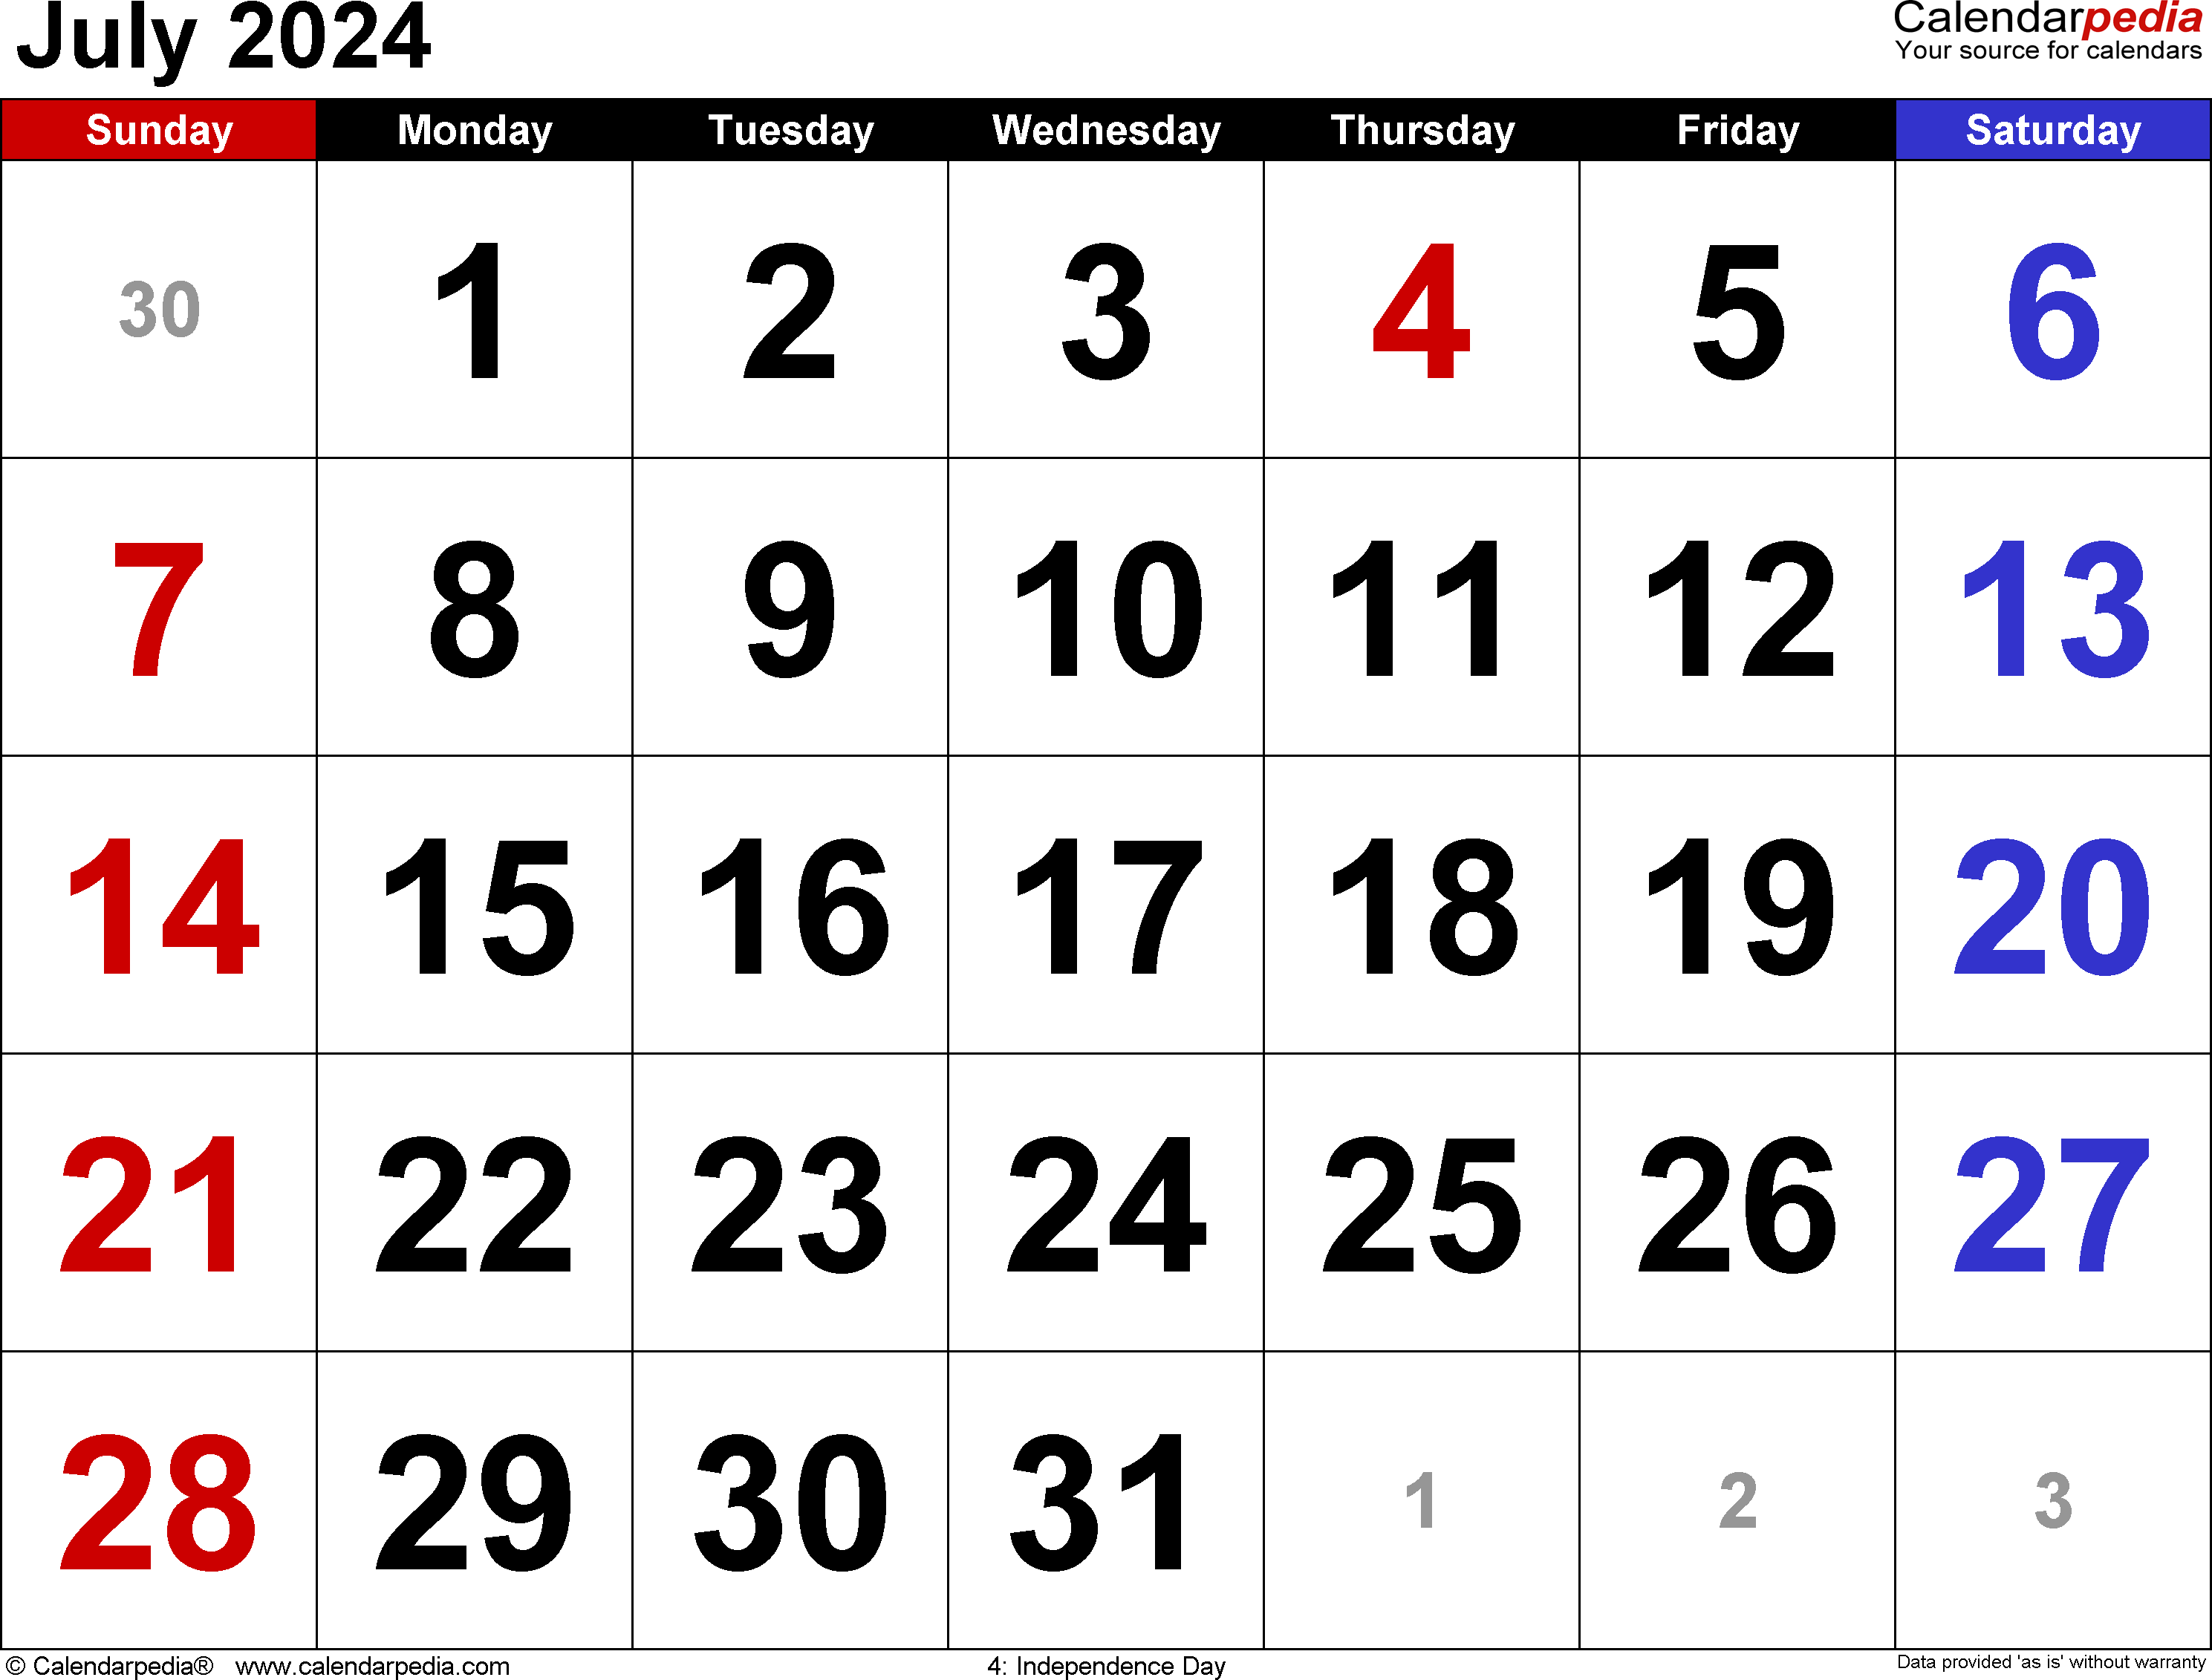 July 2024 Calendar | Templates For Word, Excel And Pdf with 6 July 2024 Calendar Printable